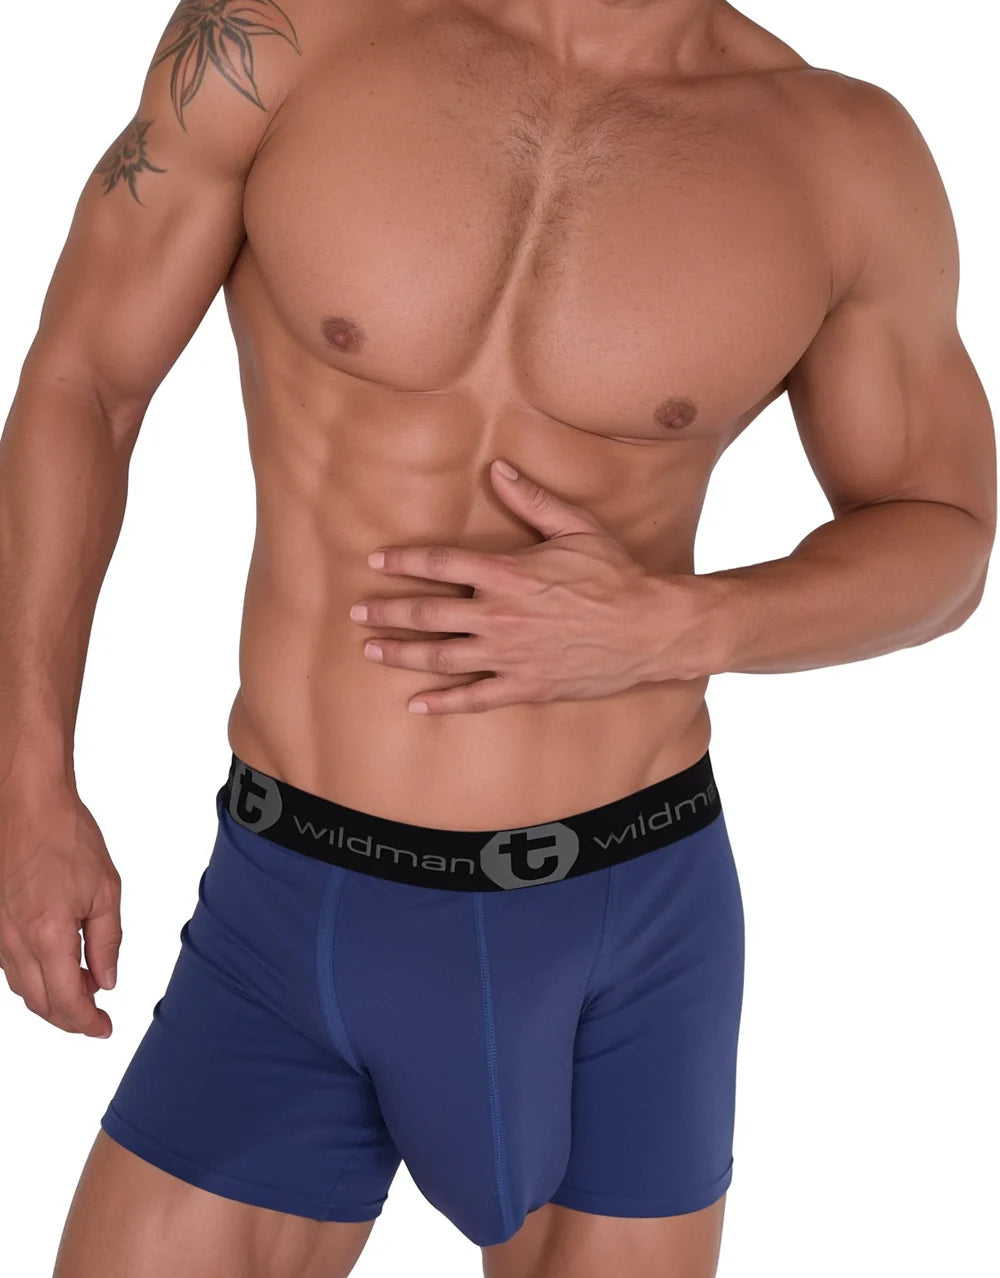 WildmanT Big Boy Pouch Underwear: The Hero's Journey of Comfort and Style